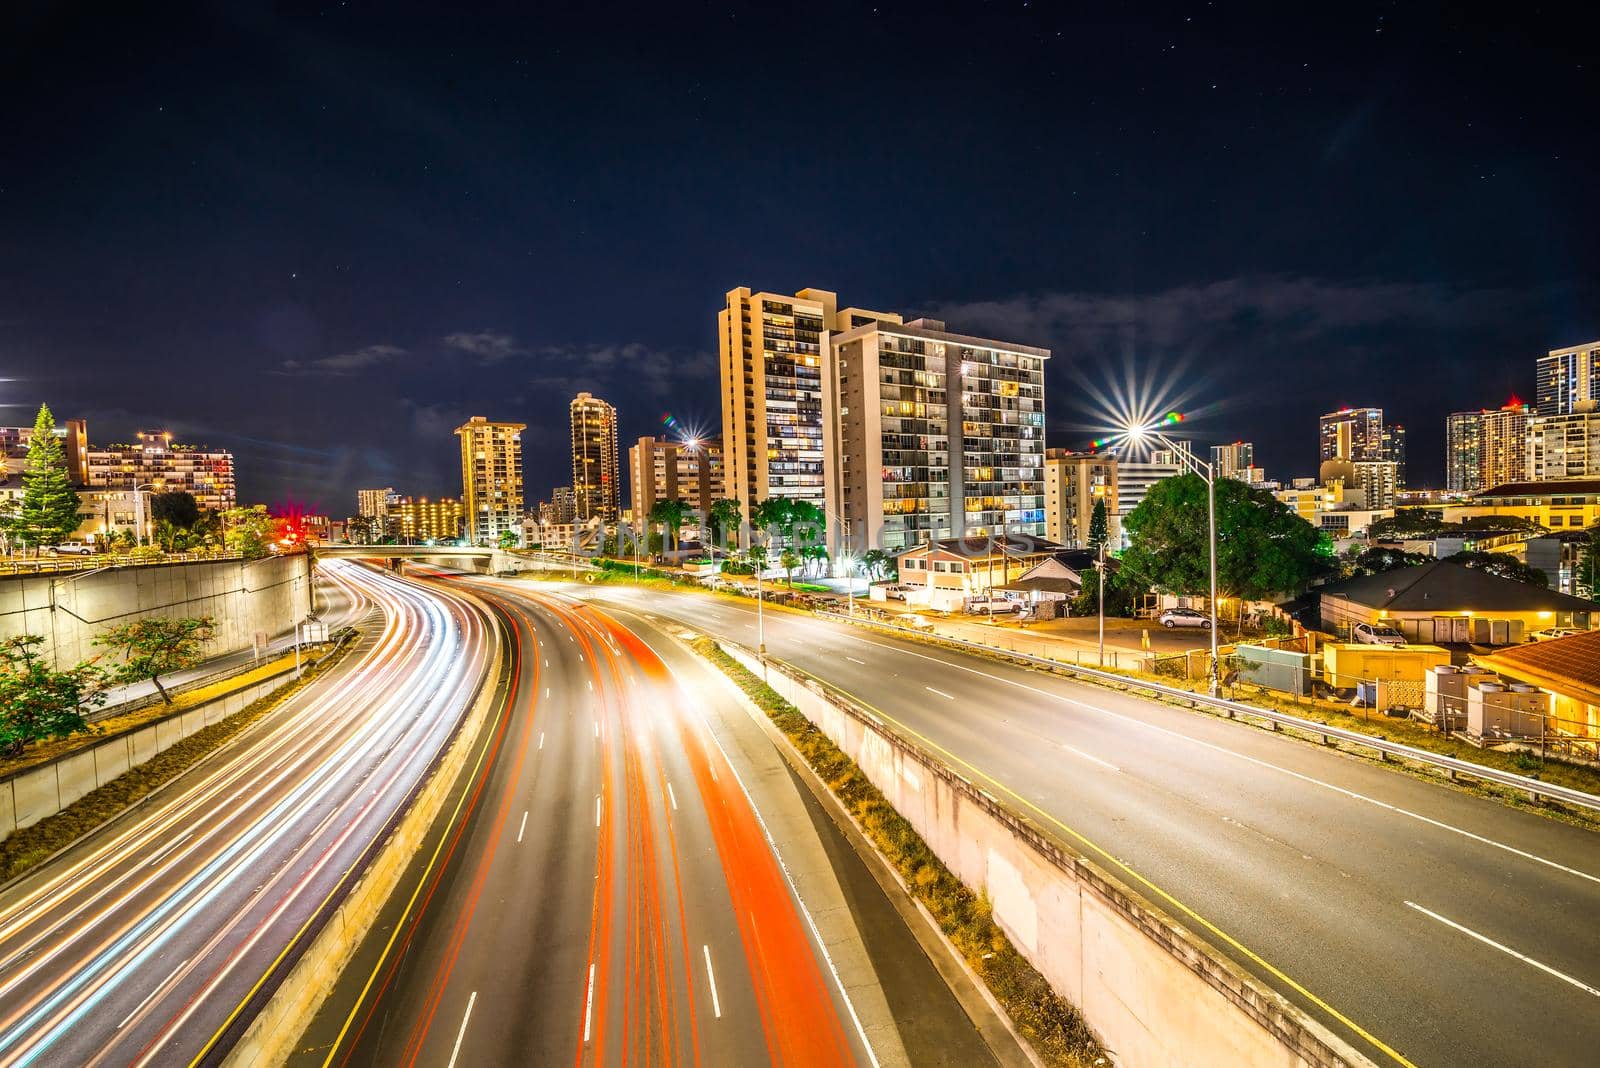 evening commute on H1 Freeway at night in honolulu hawaii by digidreamgrafix